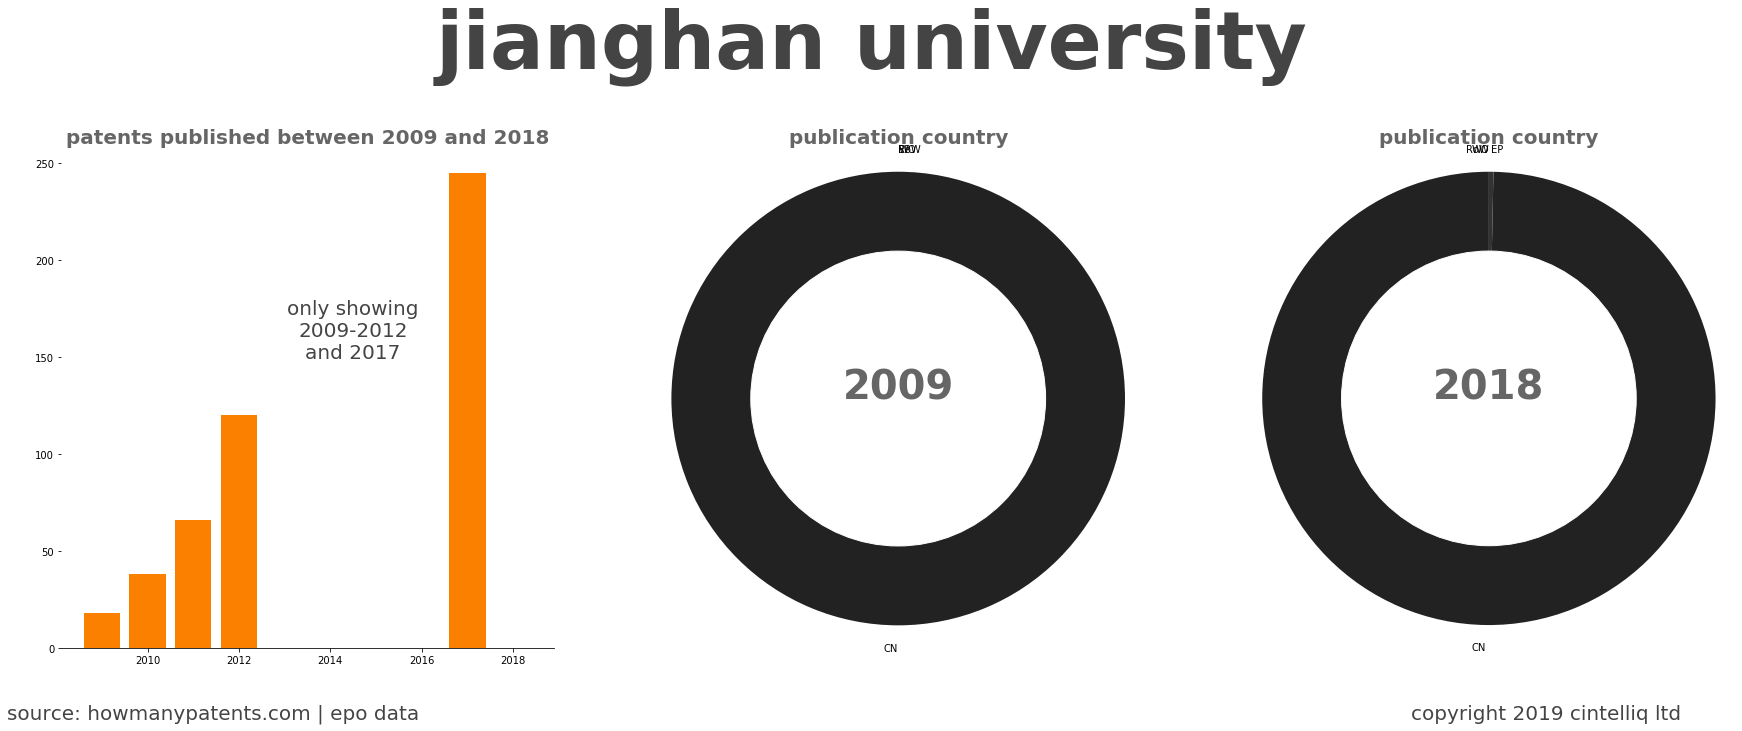 summary of patents for Jianghan University